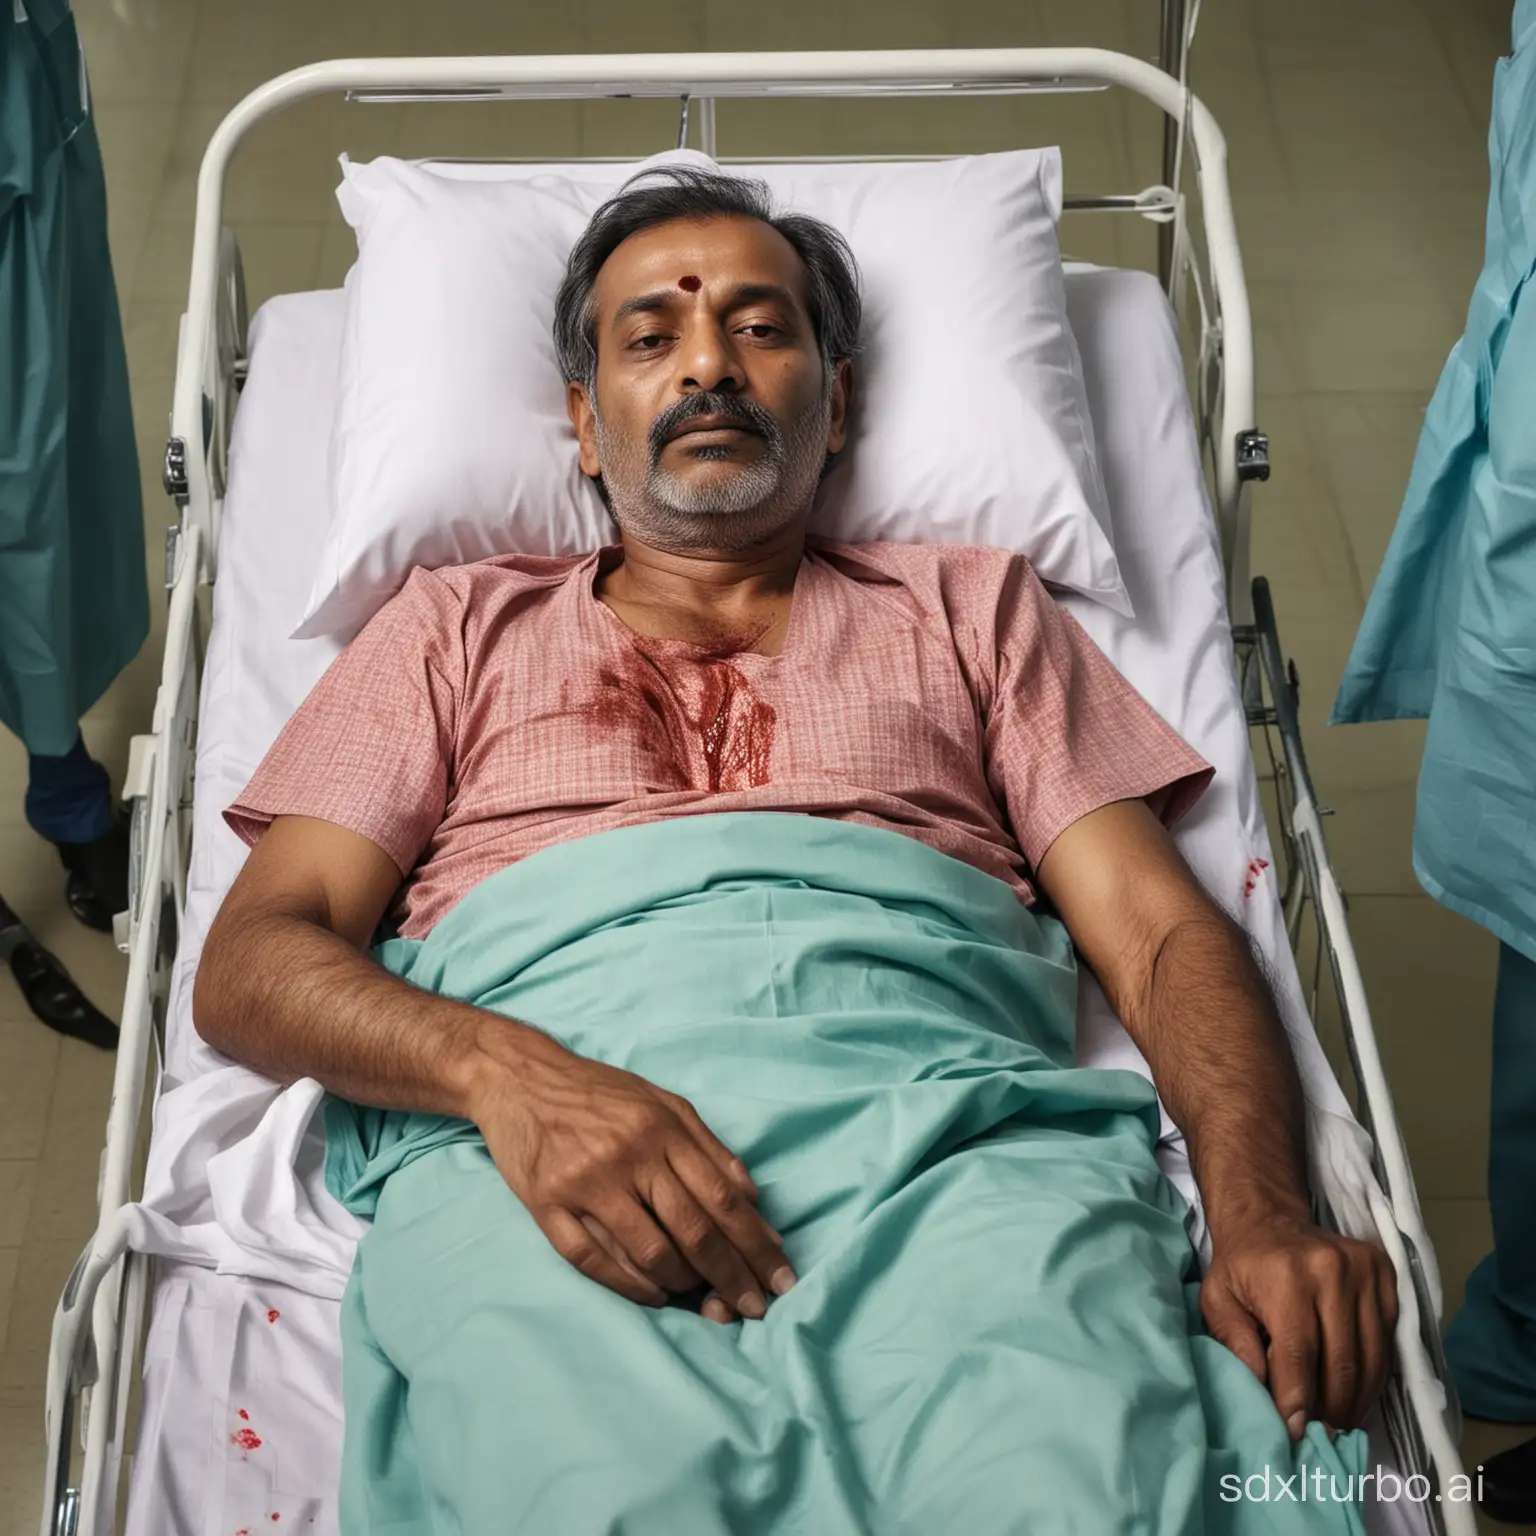 Indian-MiddleAged-Man-Unconscious-on-Hospital-Stretcher-with-Blood-Loss